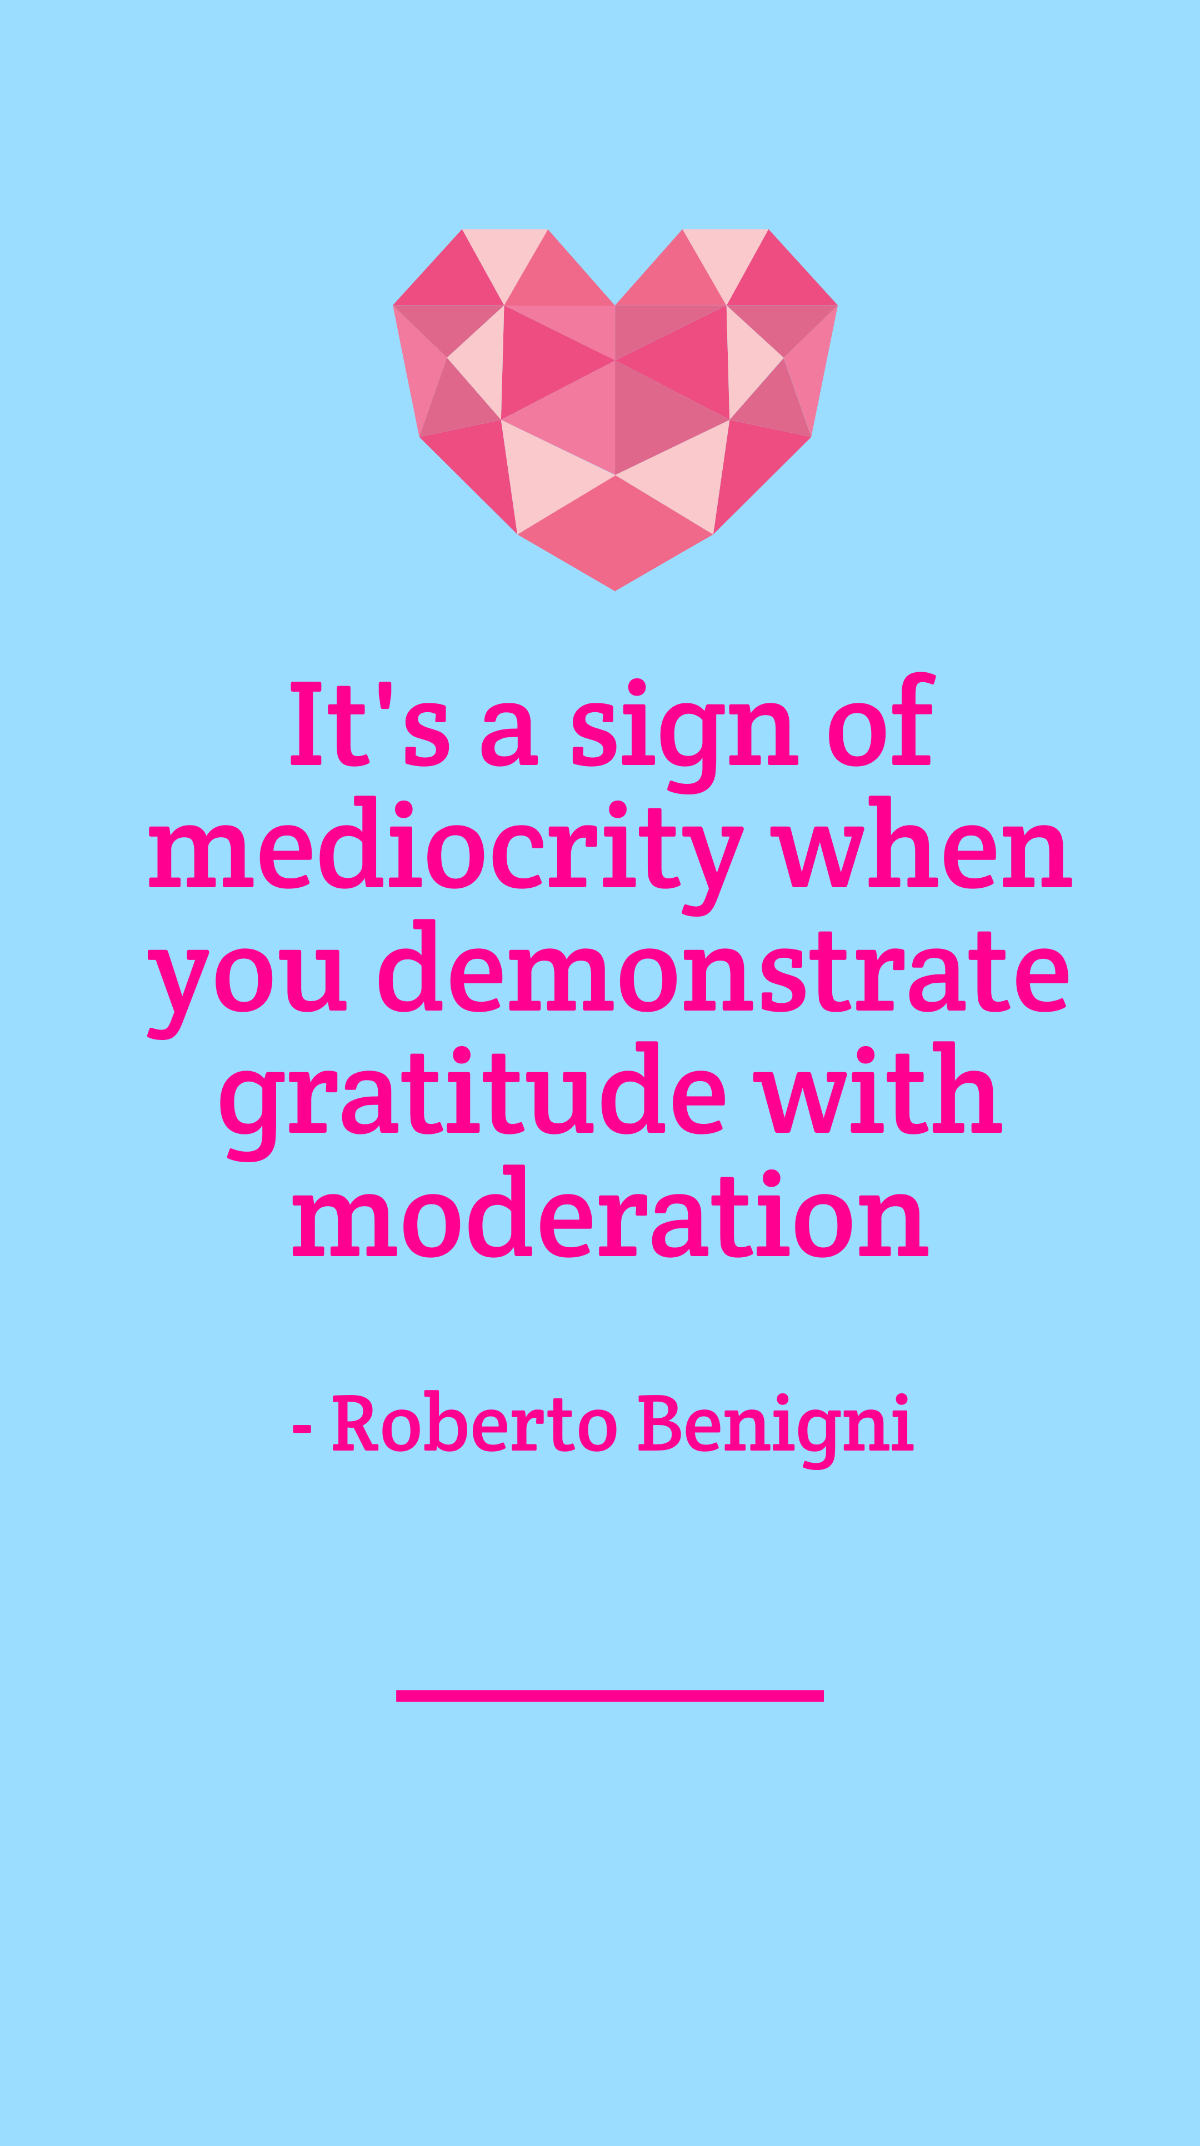 Roberto Benigni - It's a sign of mediocrity when you demonstrate gratitude with moderation Template